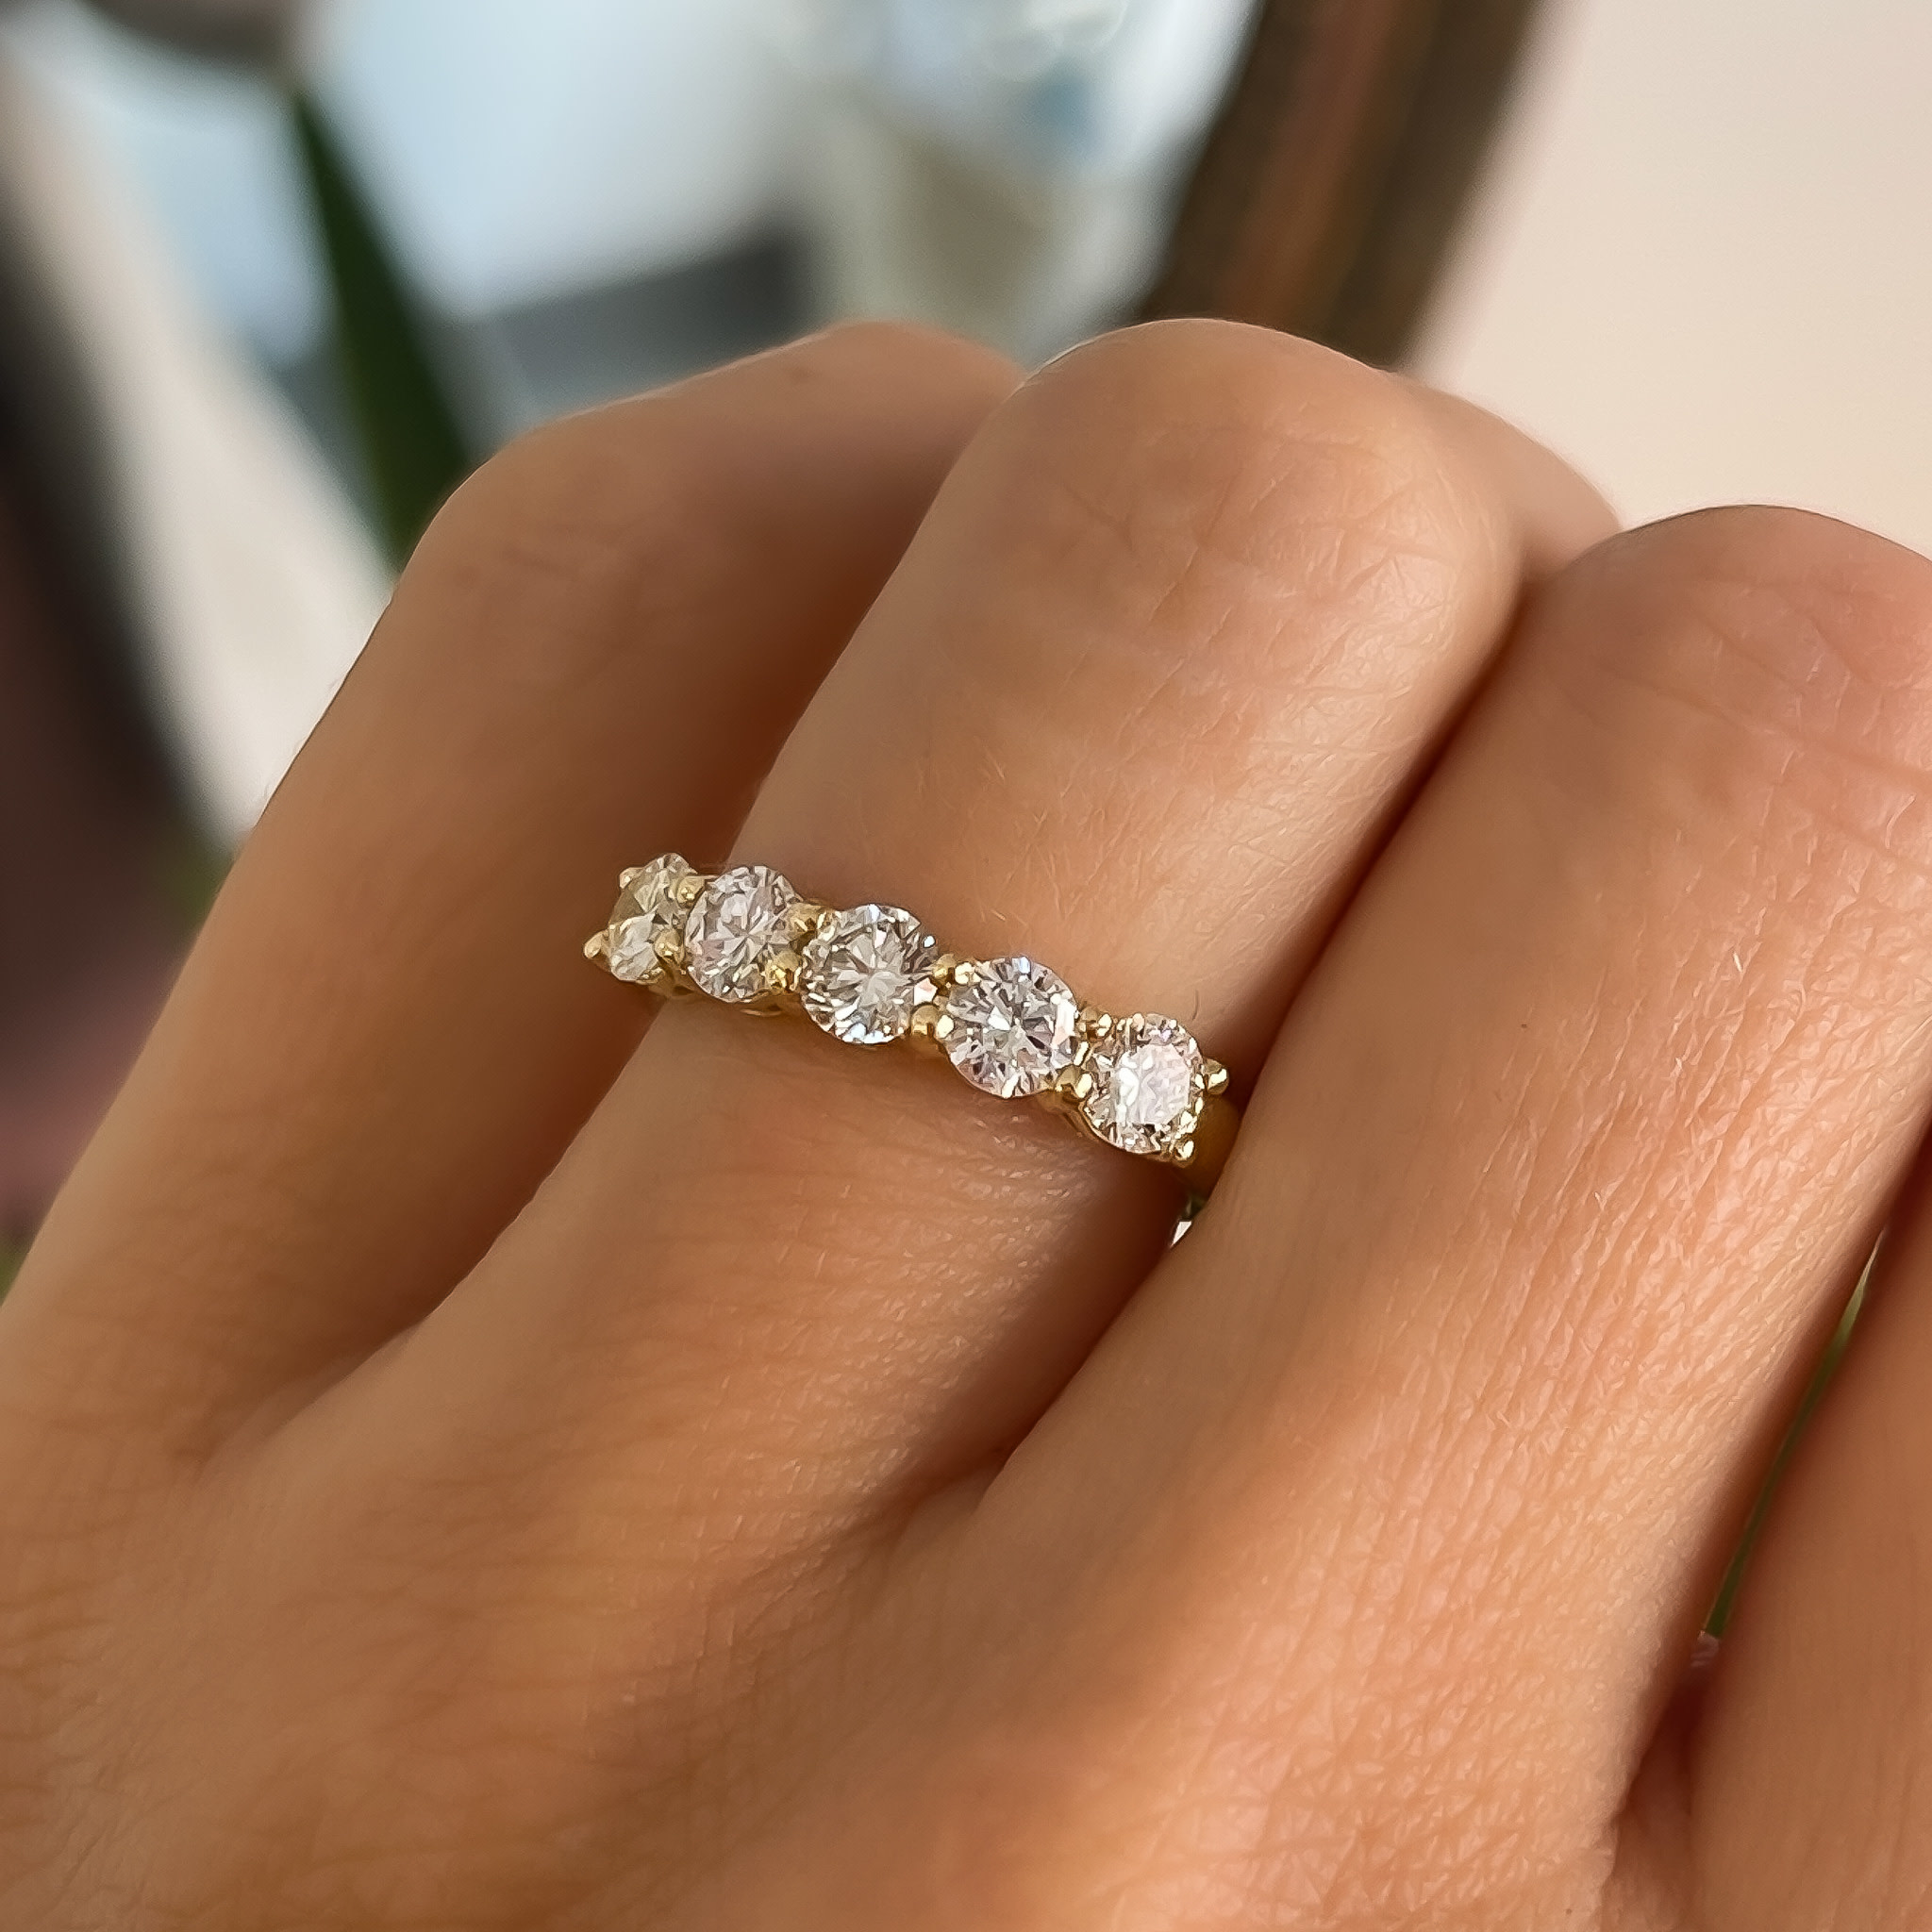 Five stone oval ring thoughts, details in comment. : r/Moissanite